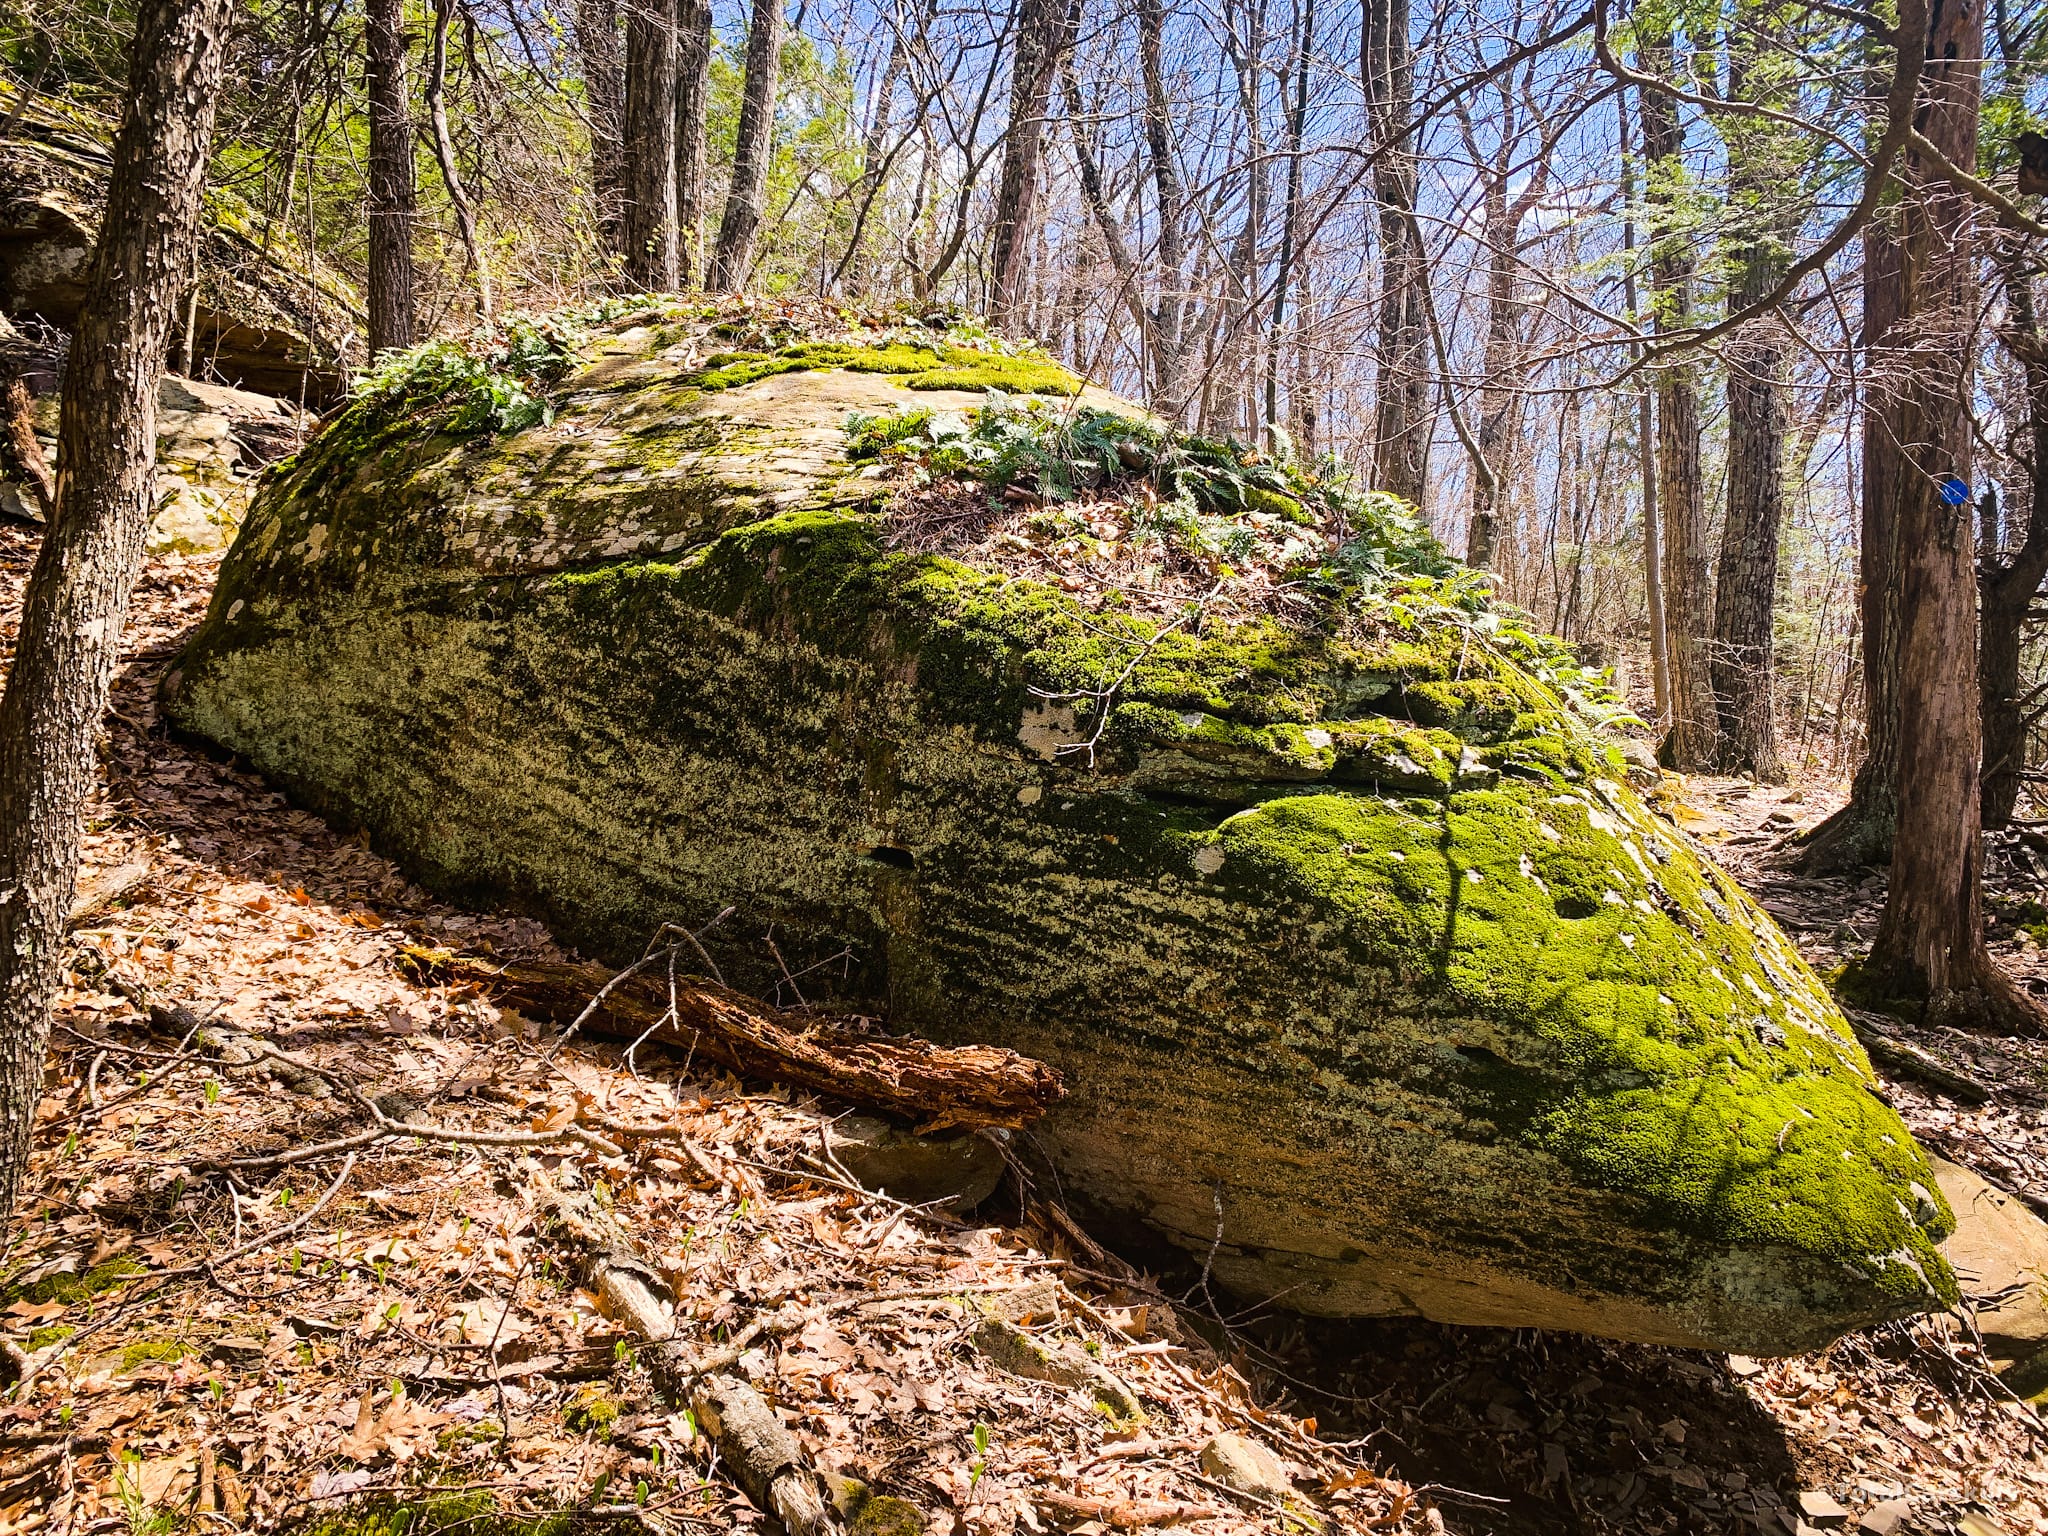 glacial erratic covered in moss